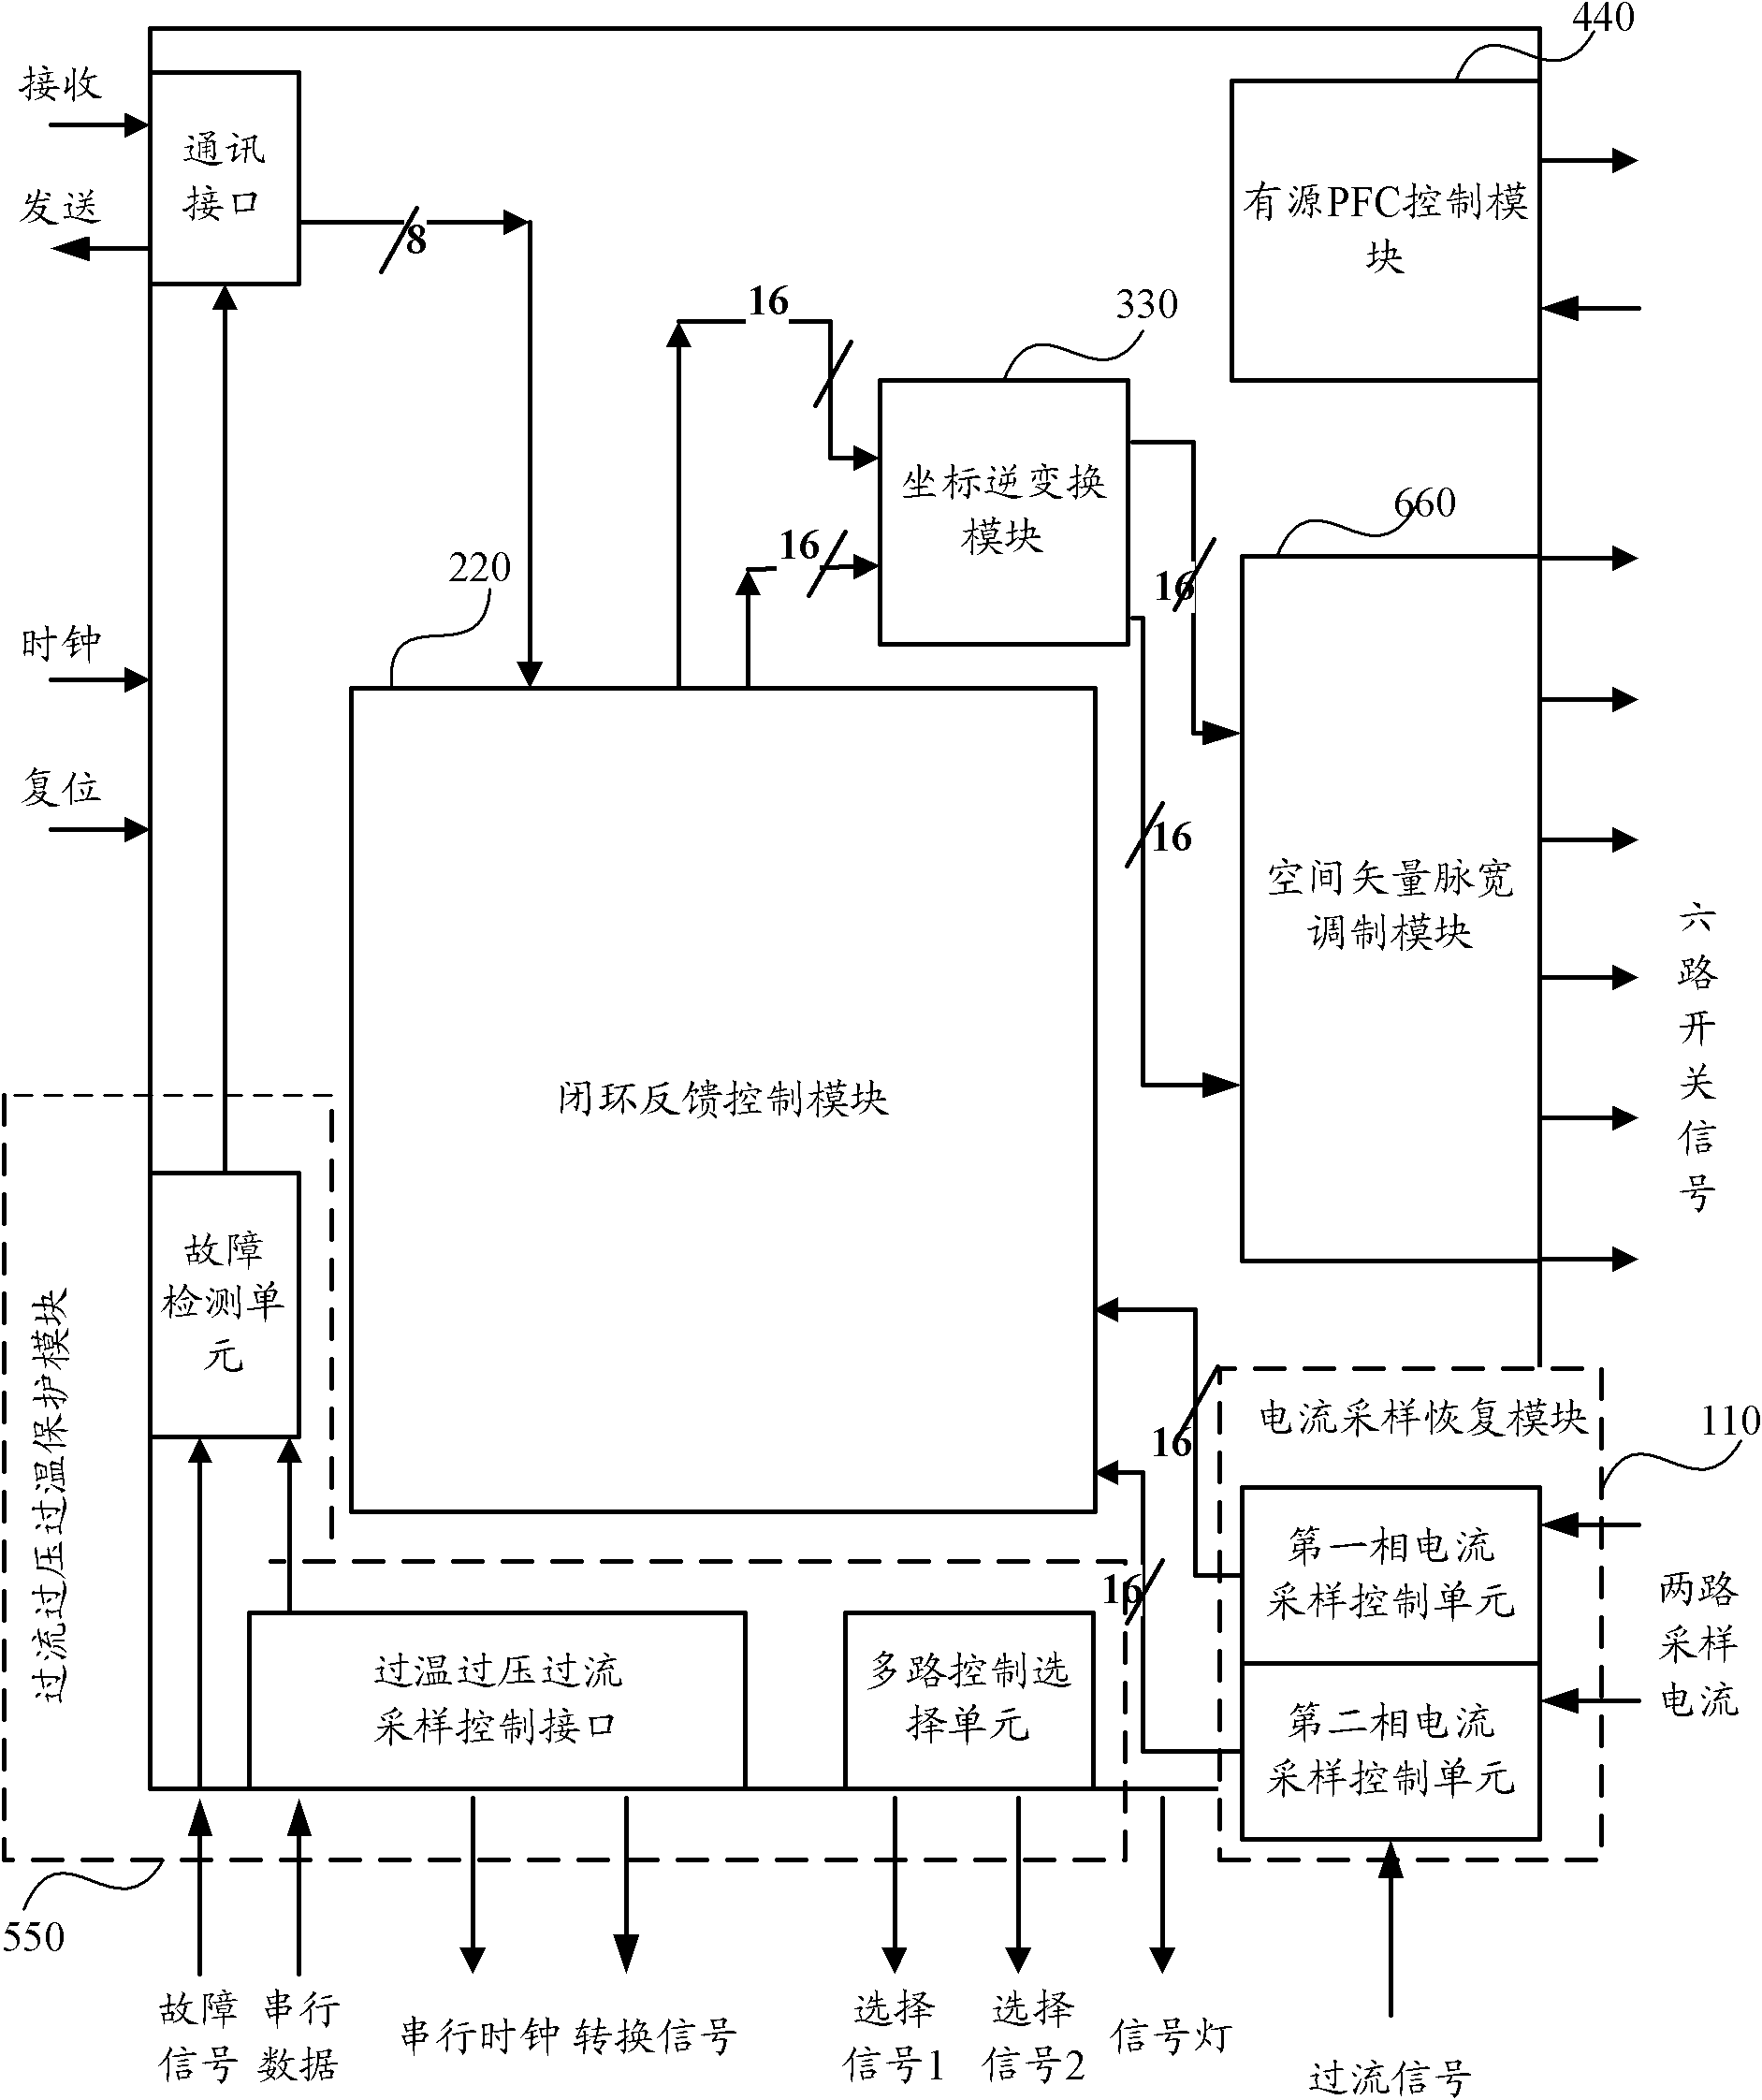 Device for closed-loop control of permanent magnet synchronous motor